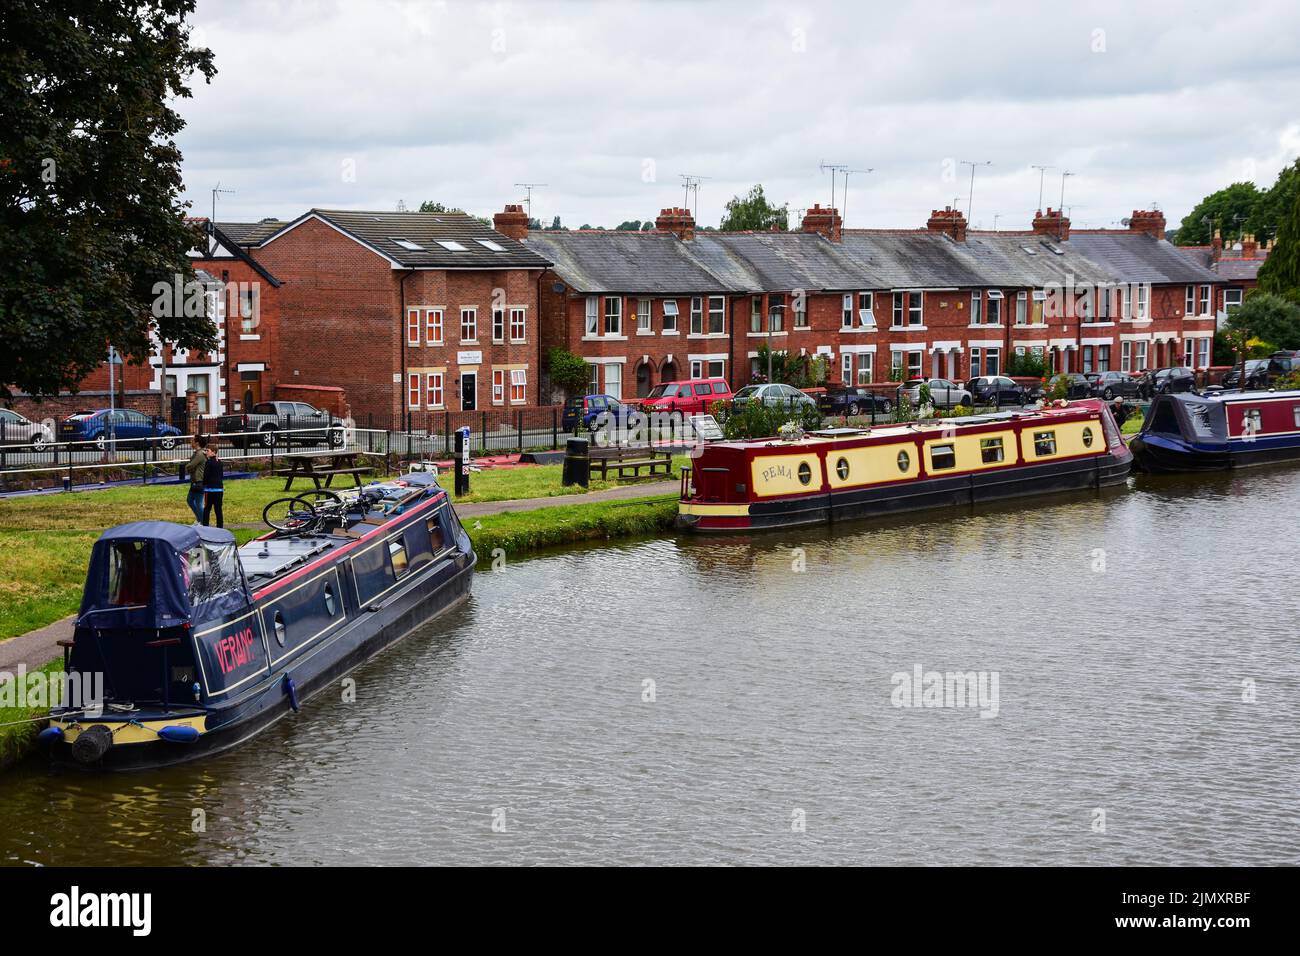 Chester, UK: Jul 3, 2022: A general scene of the Shropshire Union Canal in Chester, with narrow boats moored in the canal basin Stock Photo